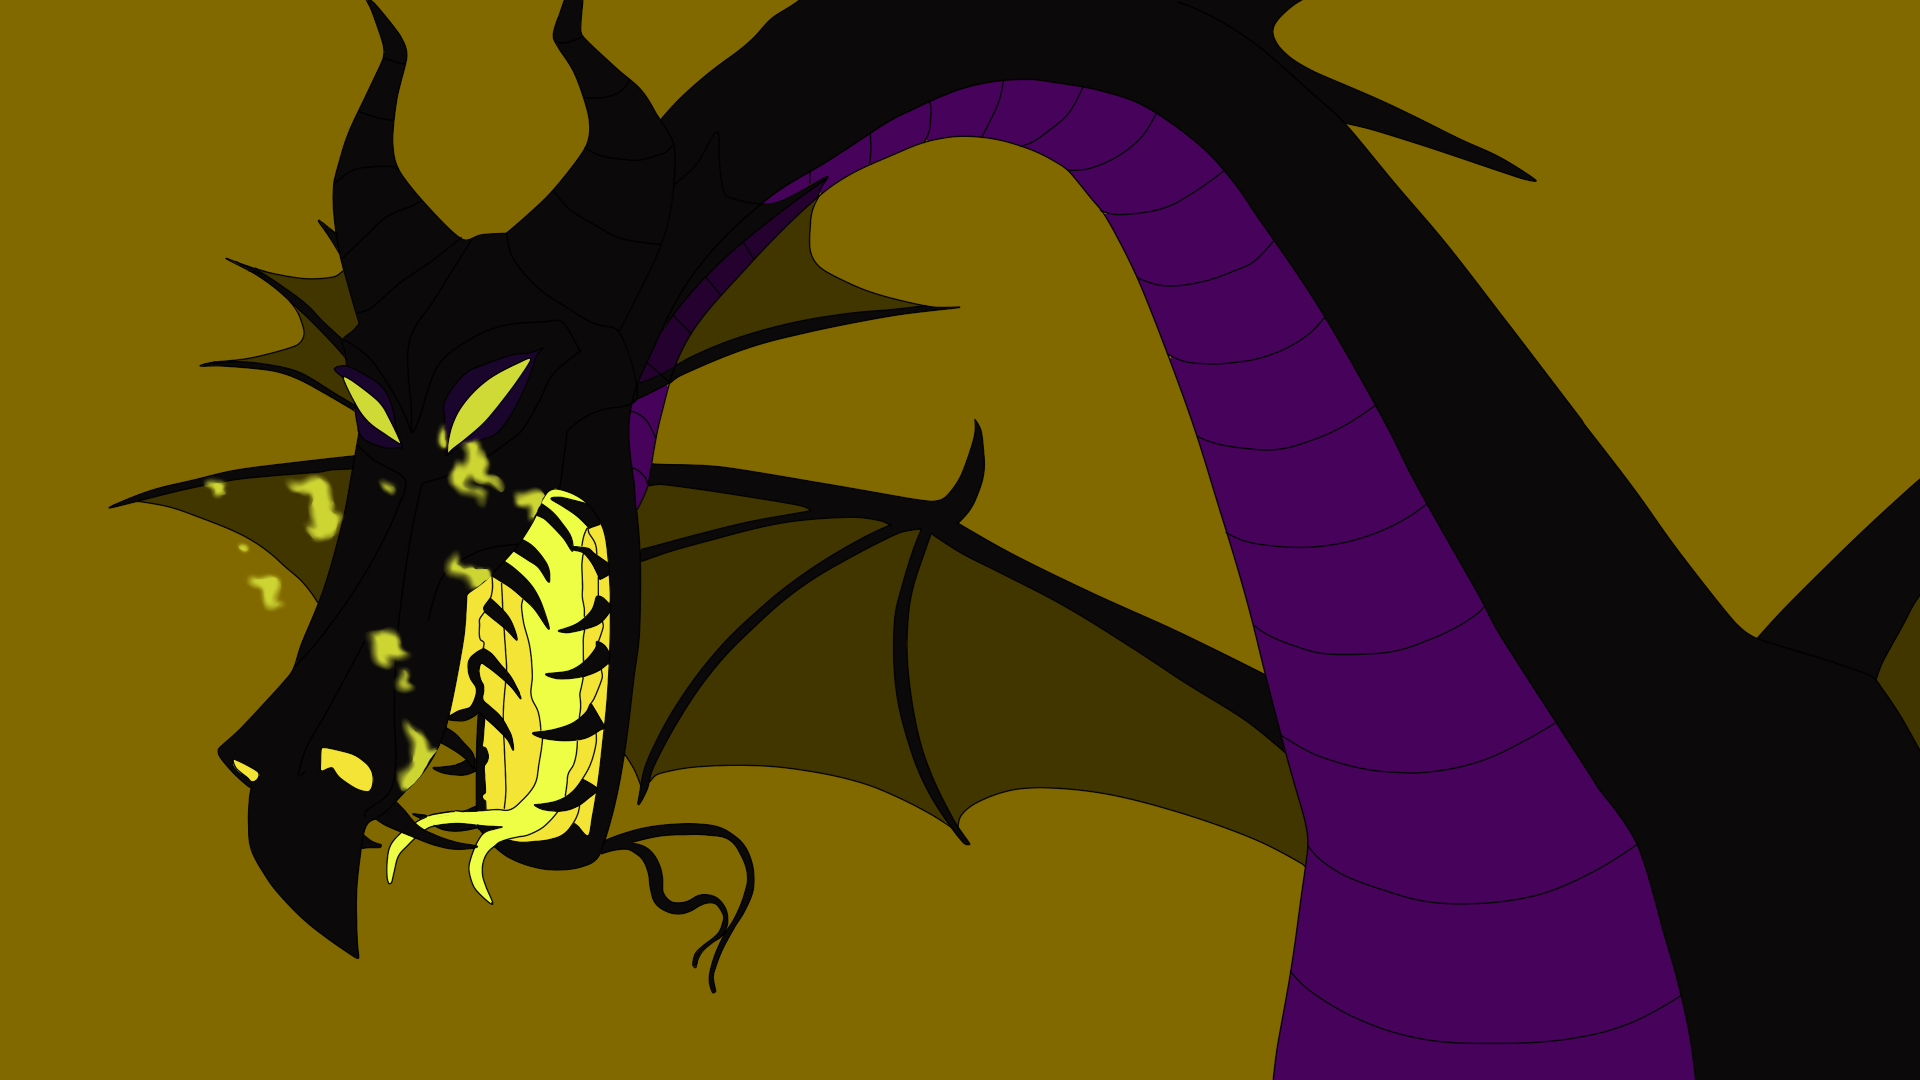 Dragon Maleficent from the Disney movie Sleeping Beauty.

Traced and colored in Paint Tool SAI.
